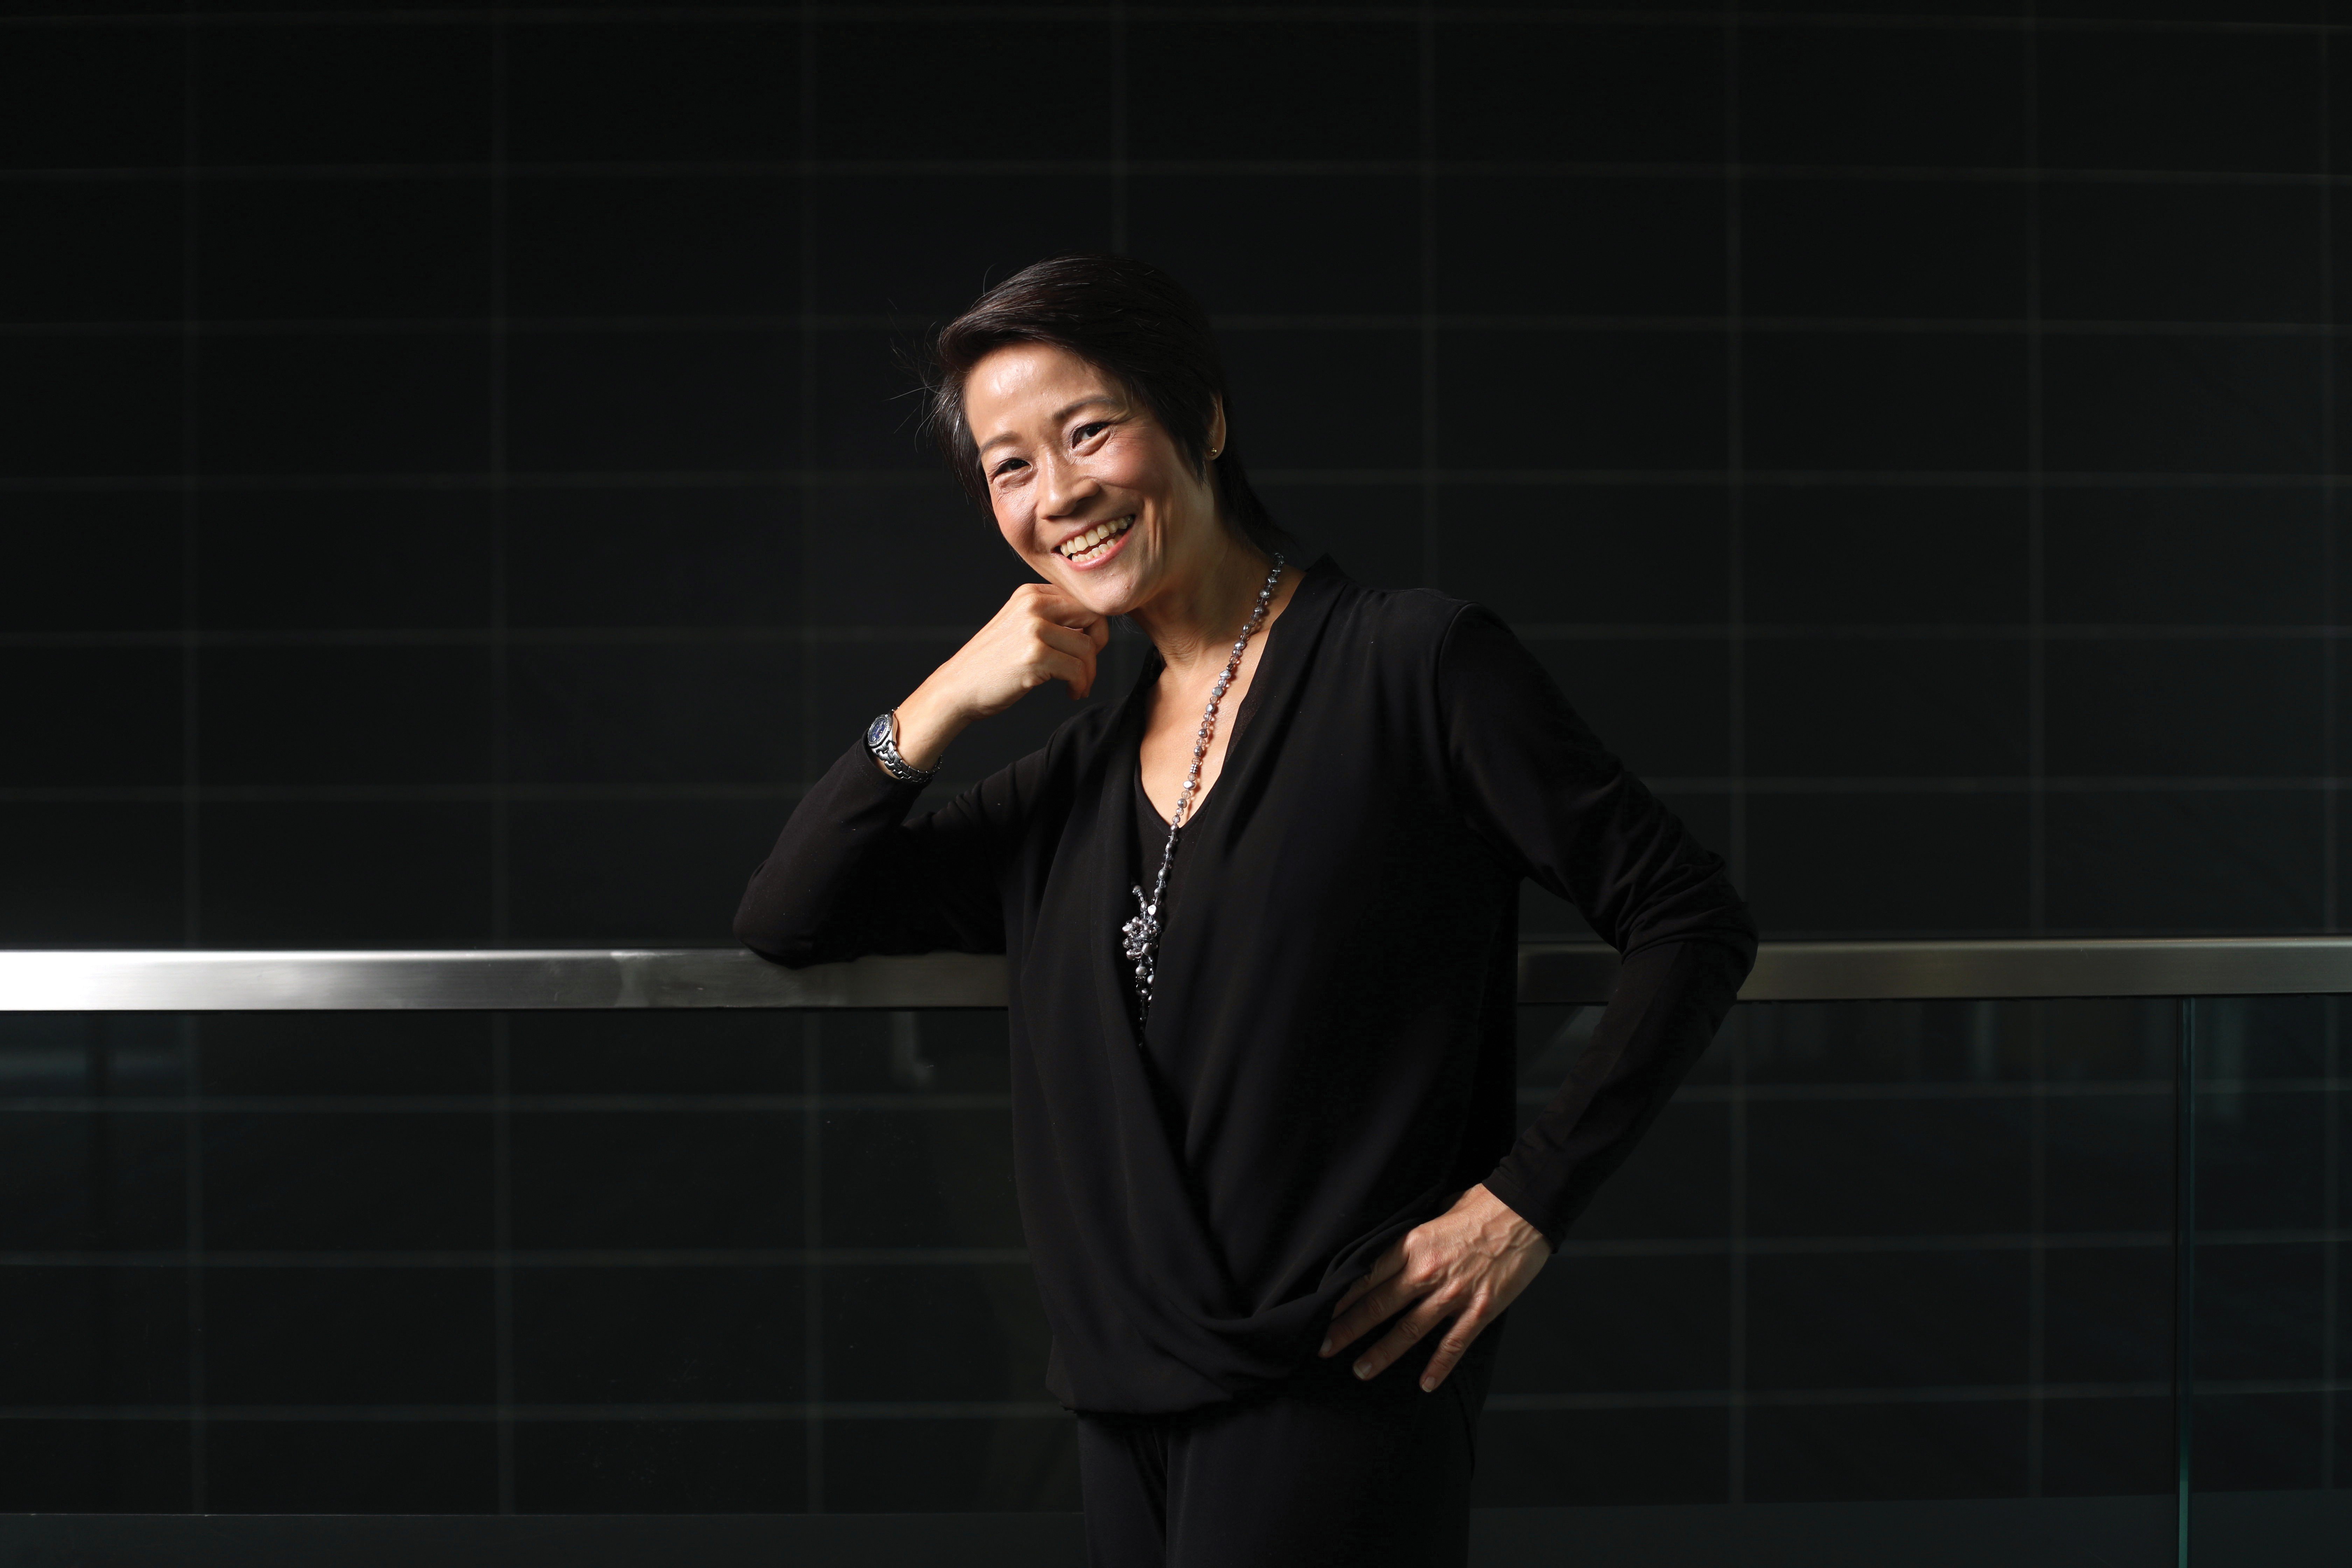 Jeanne Lim, CEO of Hanson Robotics, says she relishes the mental and physical freedom that comes with not having children or a traditional family per se. Photo: Handout